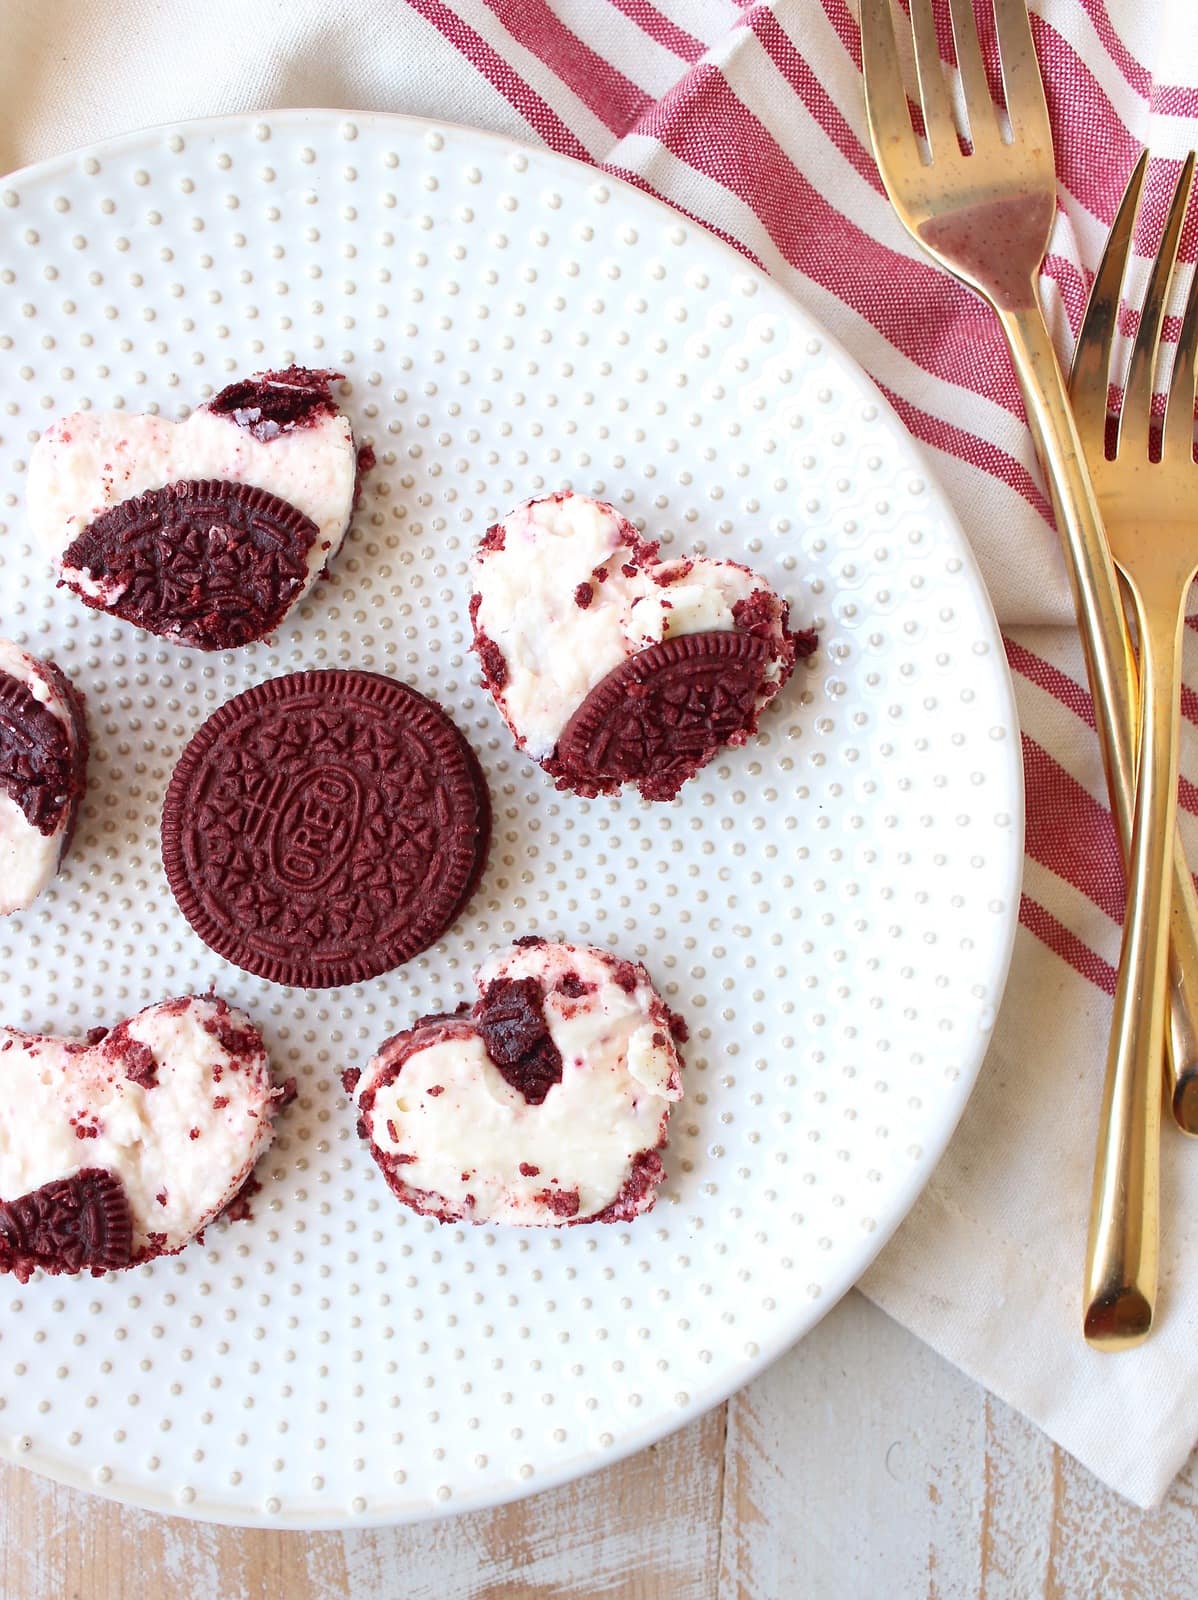 These delicious no bake cheesecake bars with a Red Velvet Oreo crust are sweet, decadent and can be cut into heart shapes for a cute Valentine's Day Treat!